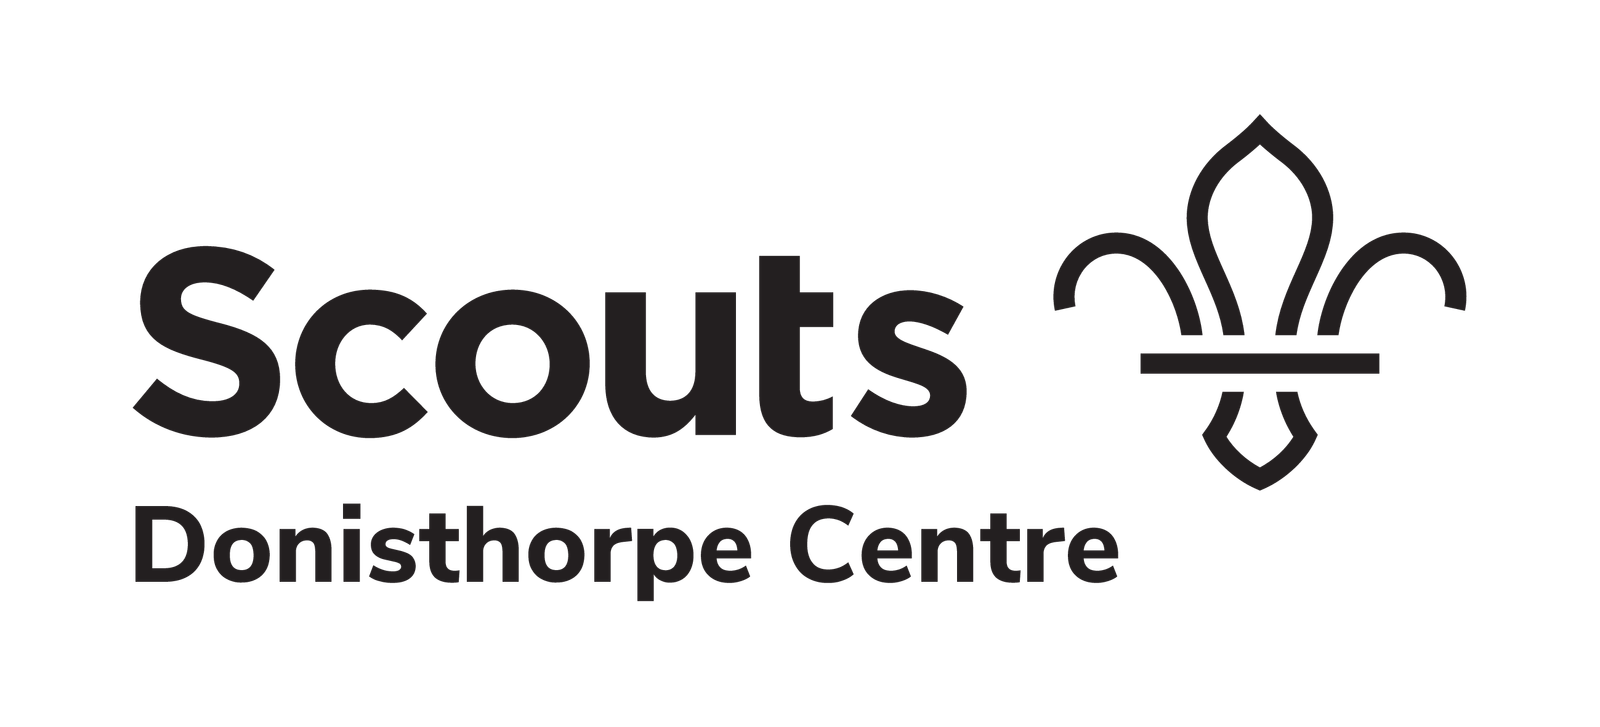 Donisthorpe Scout Centre